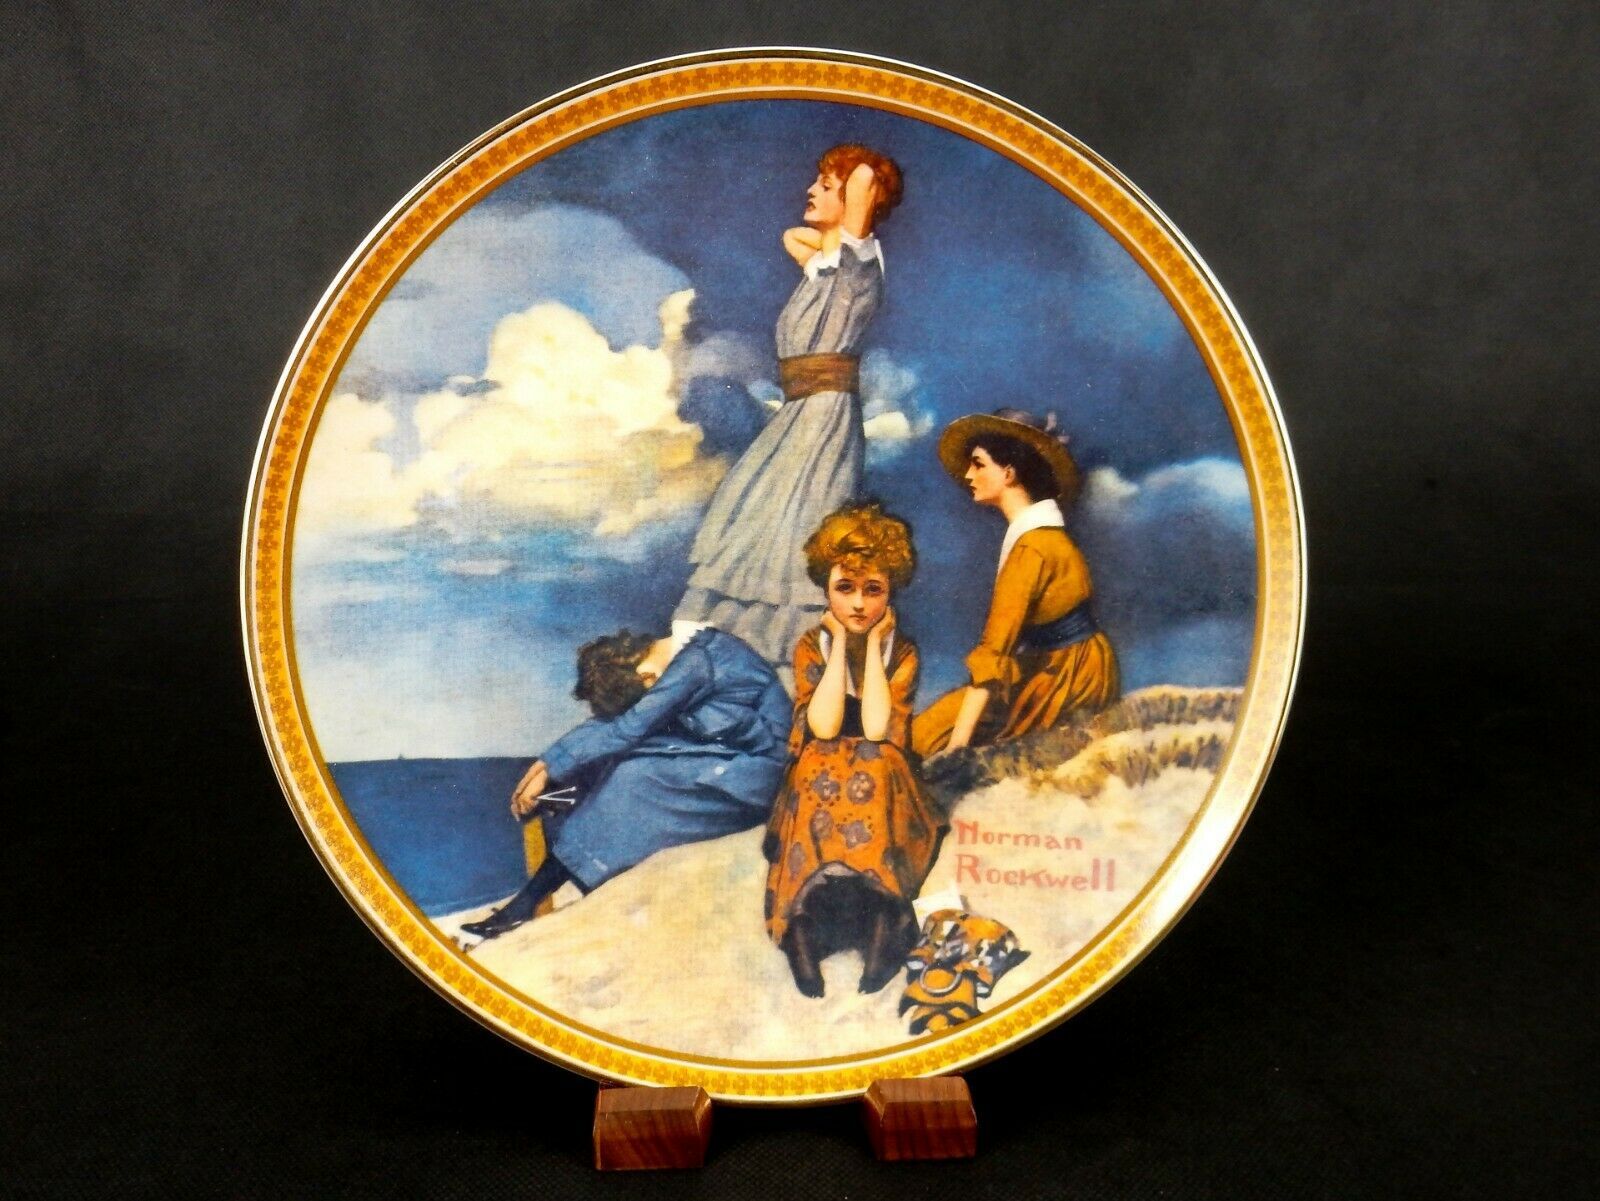 Primary image for Norman Rockwell Plate, "Waiting On The Shore", 2nd Rediscovered Women, #PLT30B